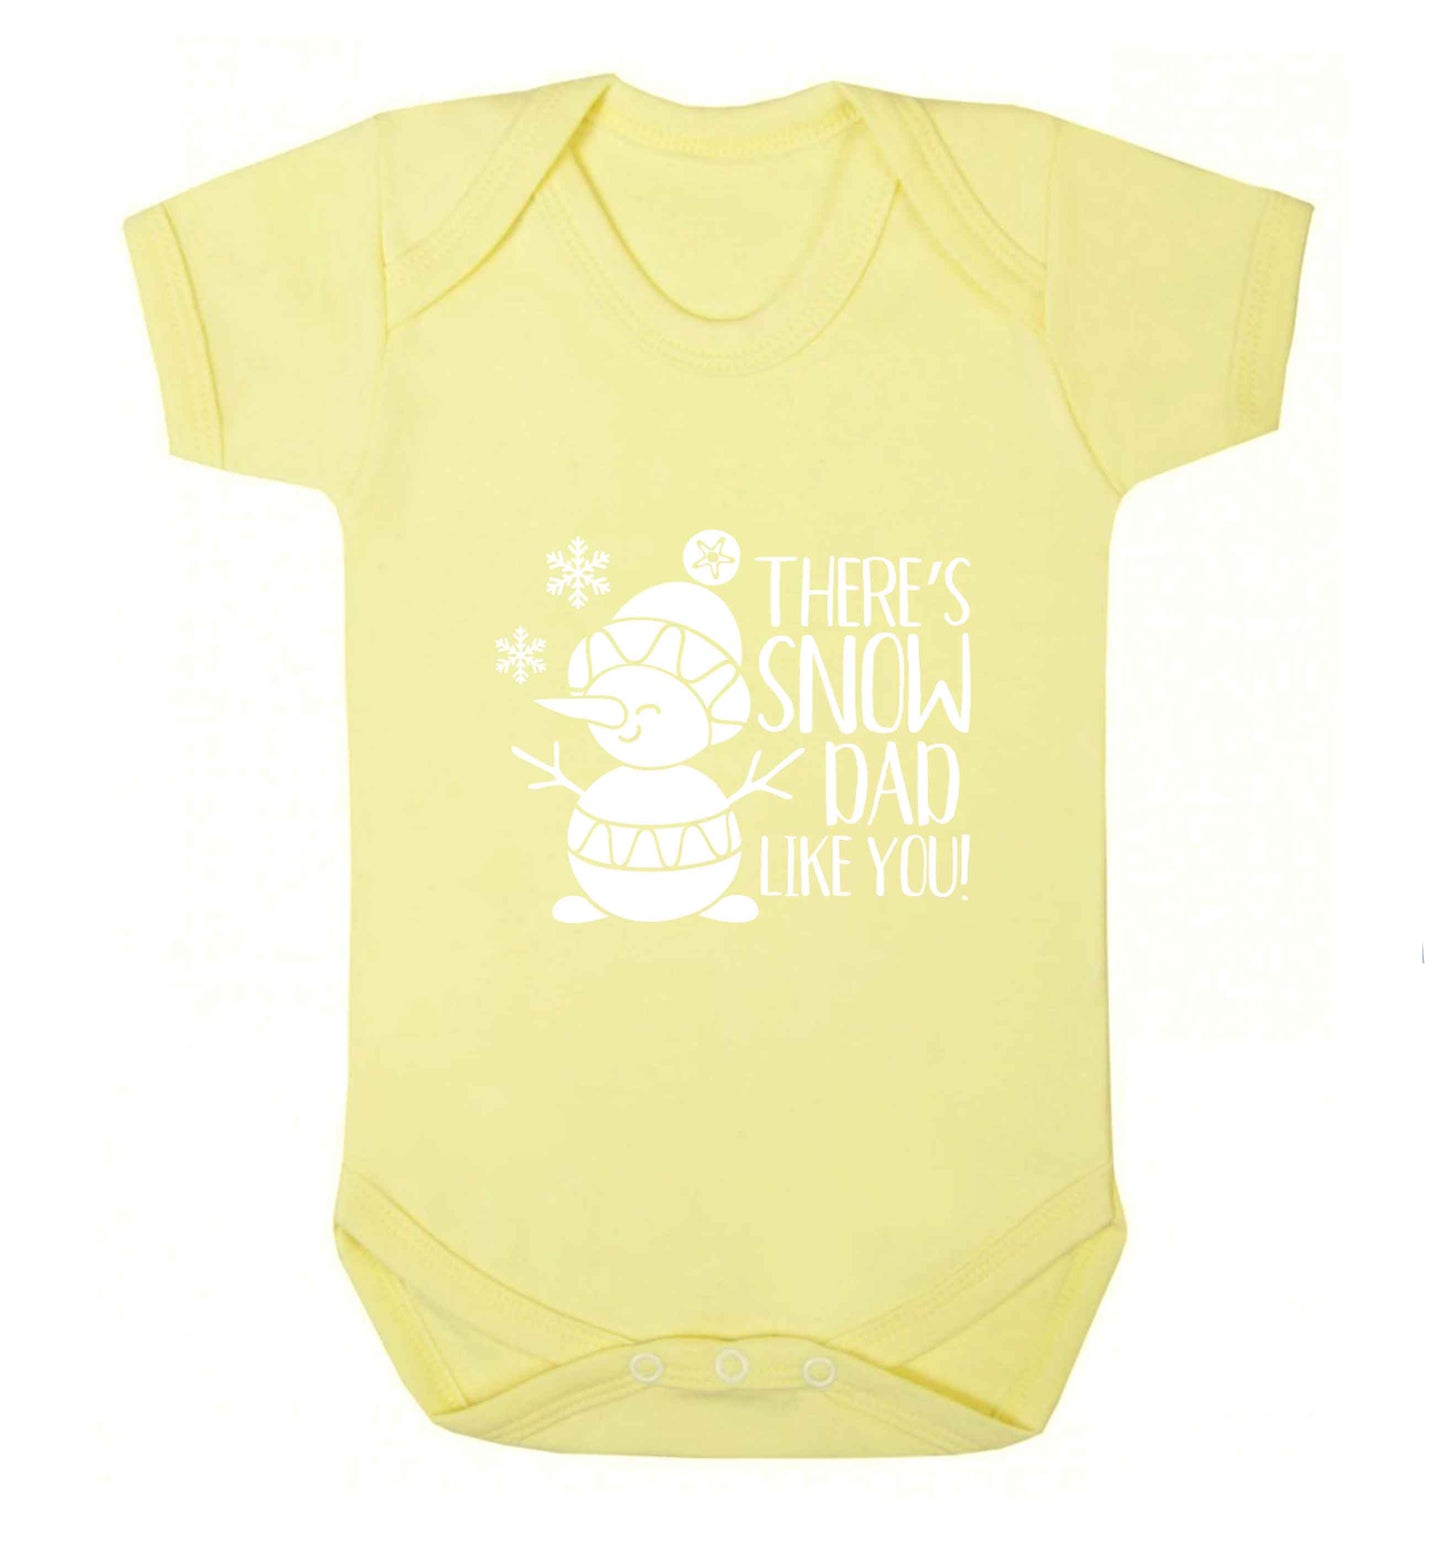 There's snow dad like you baby vest pale yellow 18-24 months